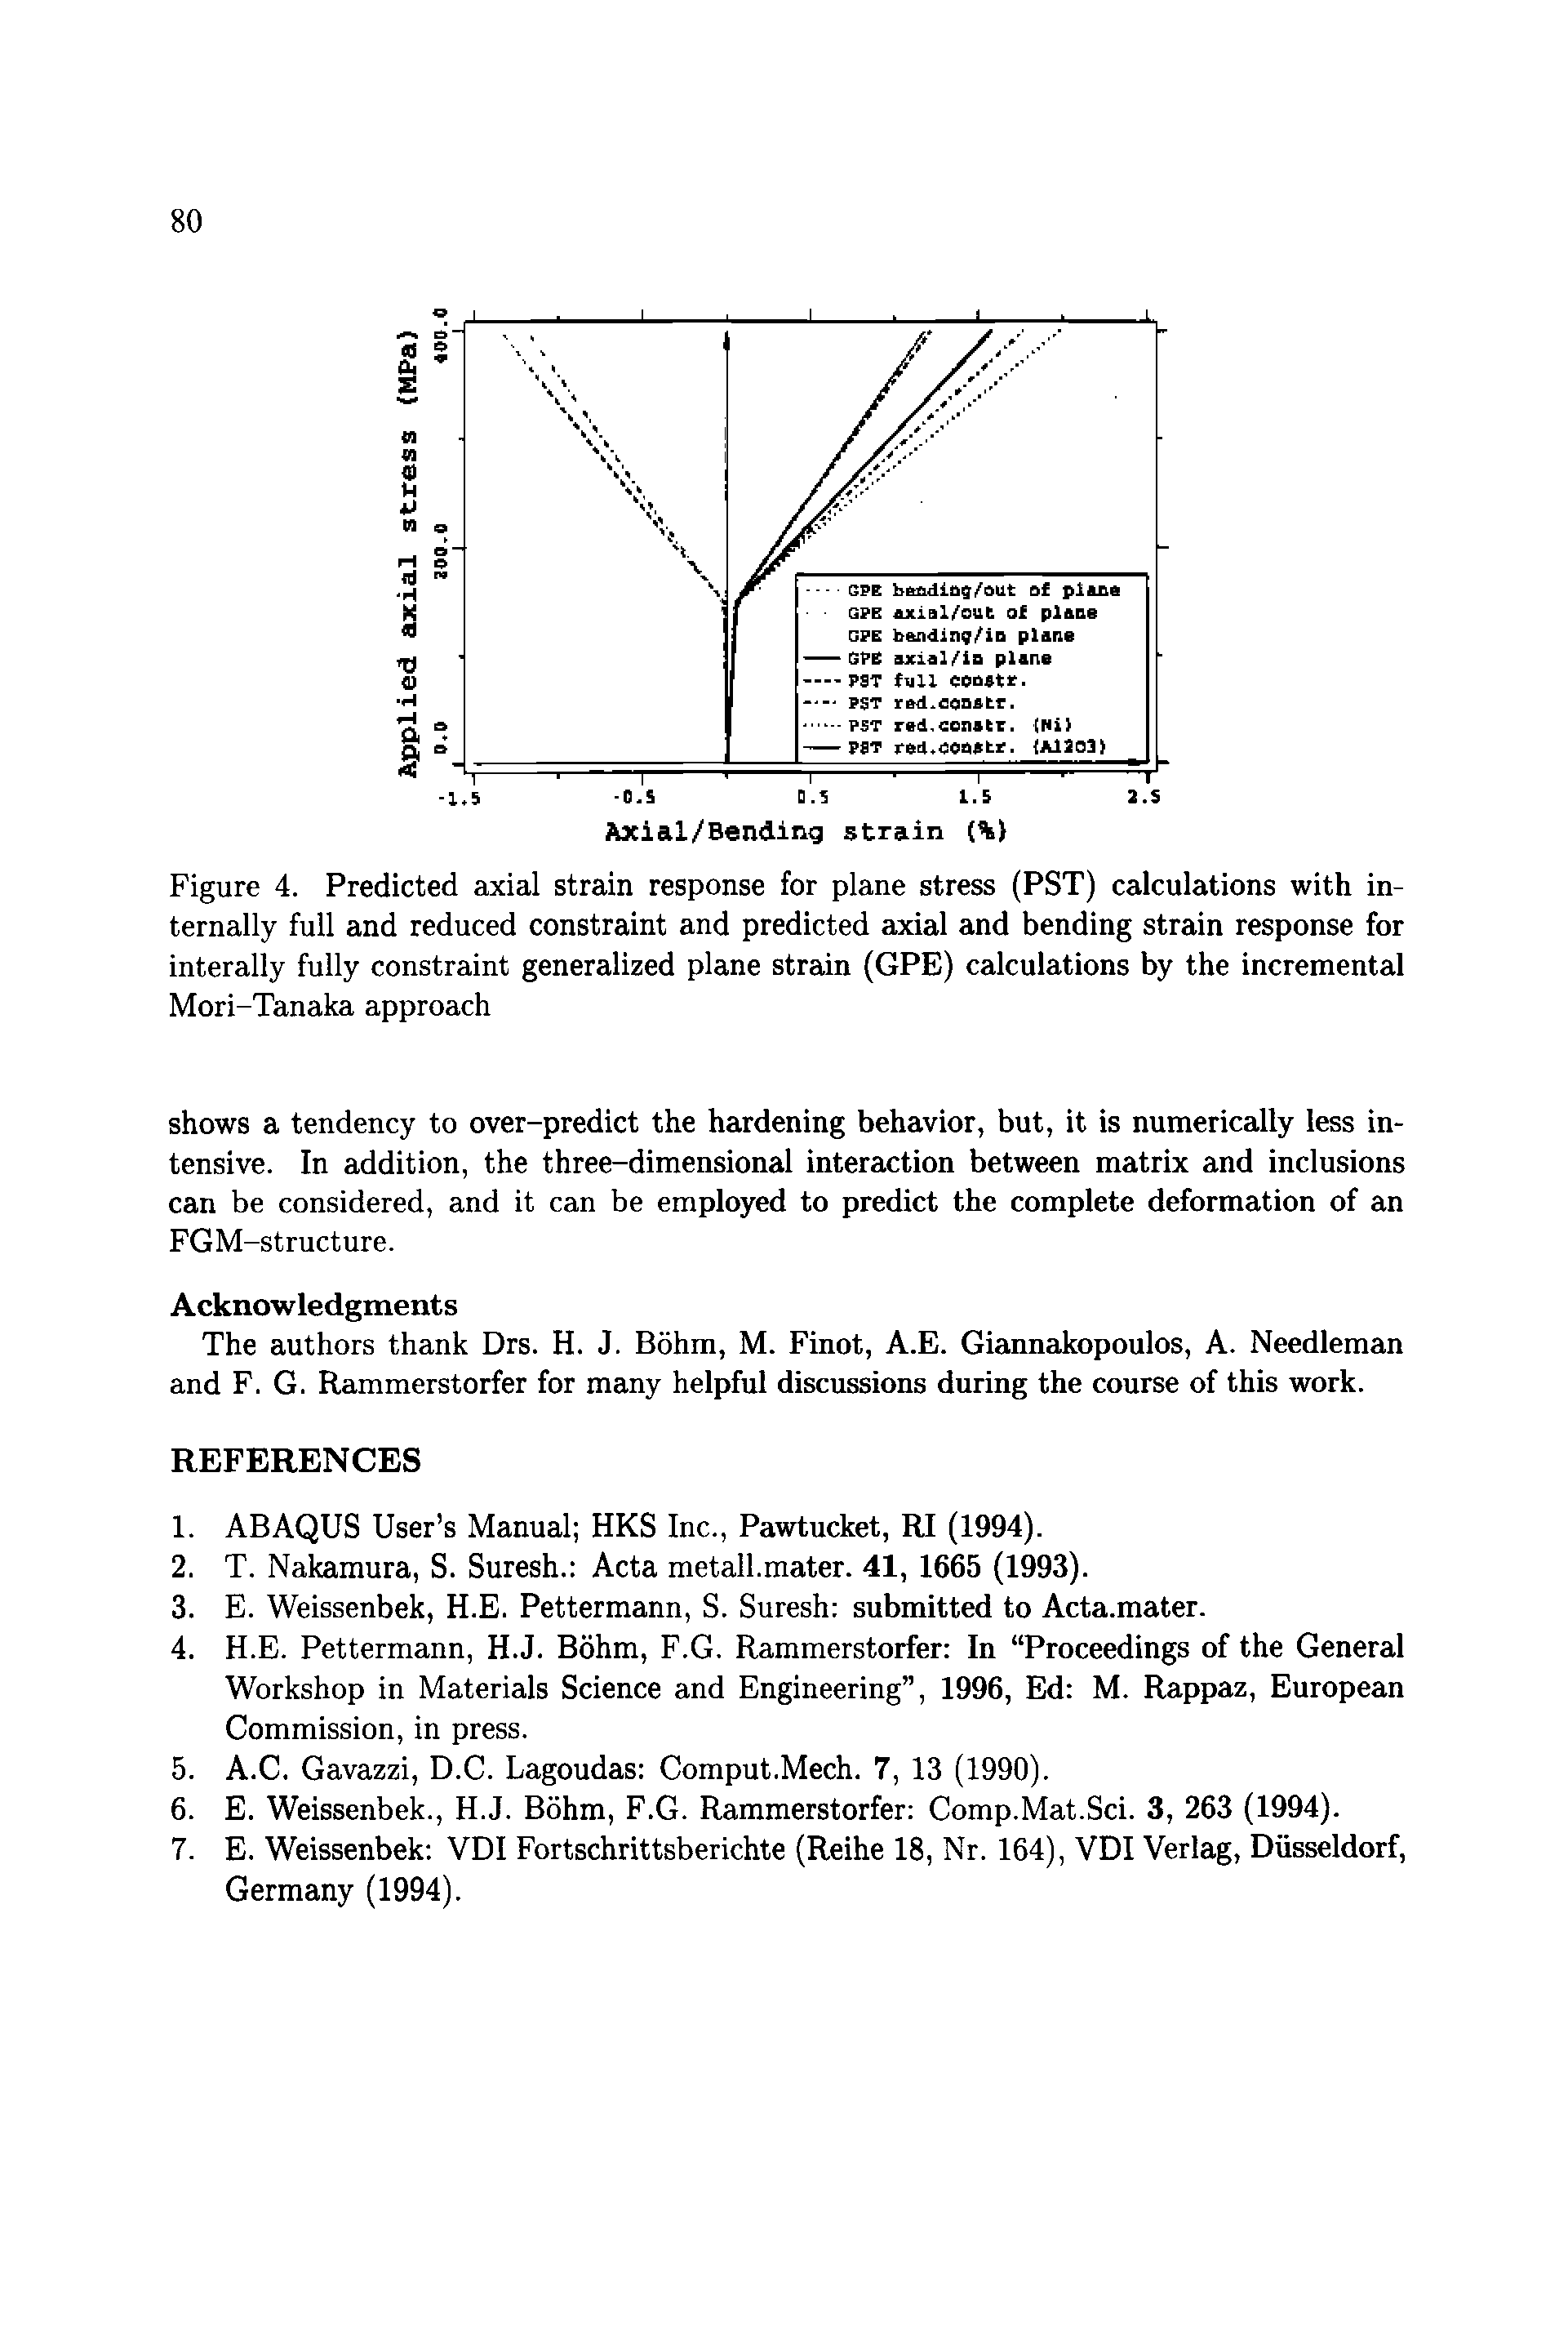 Figure 4. Predicted axial strain response for plane stress (PST) calculations with internally full and reduced constraint and predicted axial and bending strain response for interally fully constraint generalized plane strain (GPE) calculations by the incremental Mori-Tanaka approach...